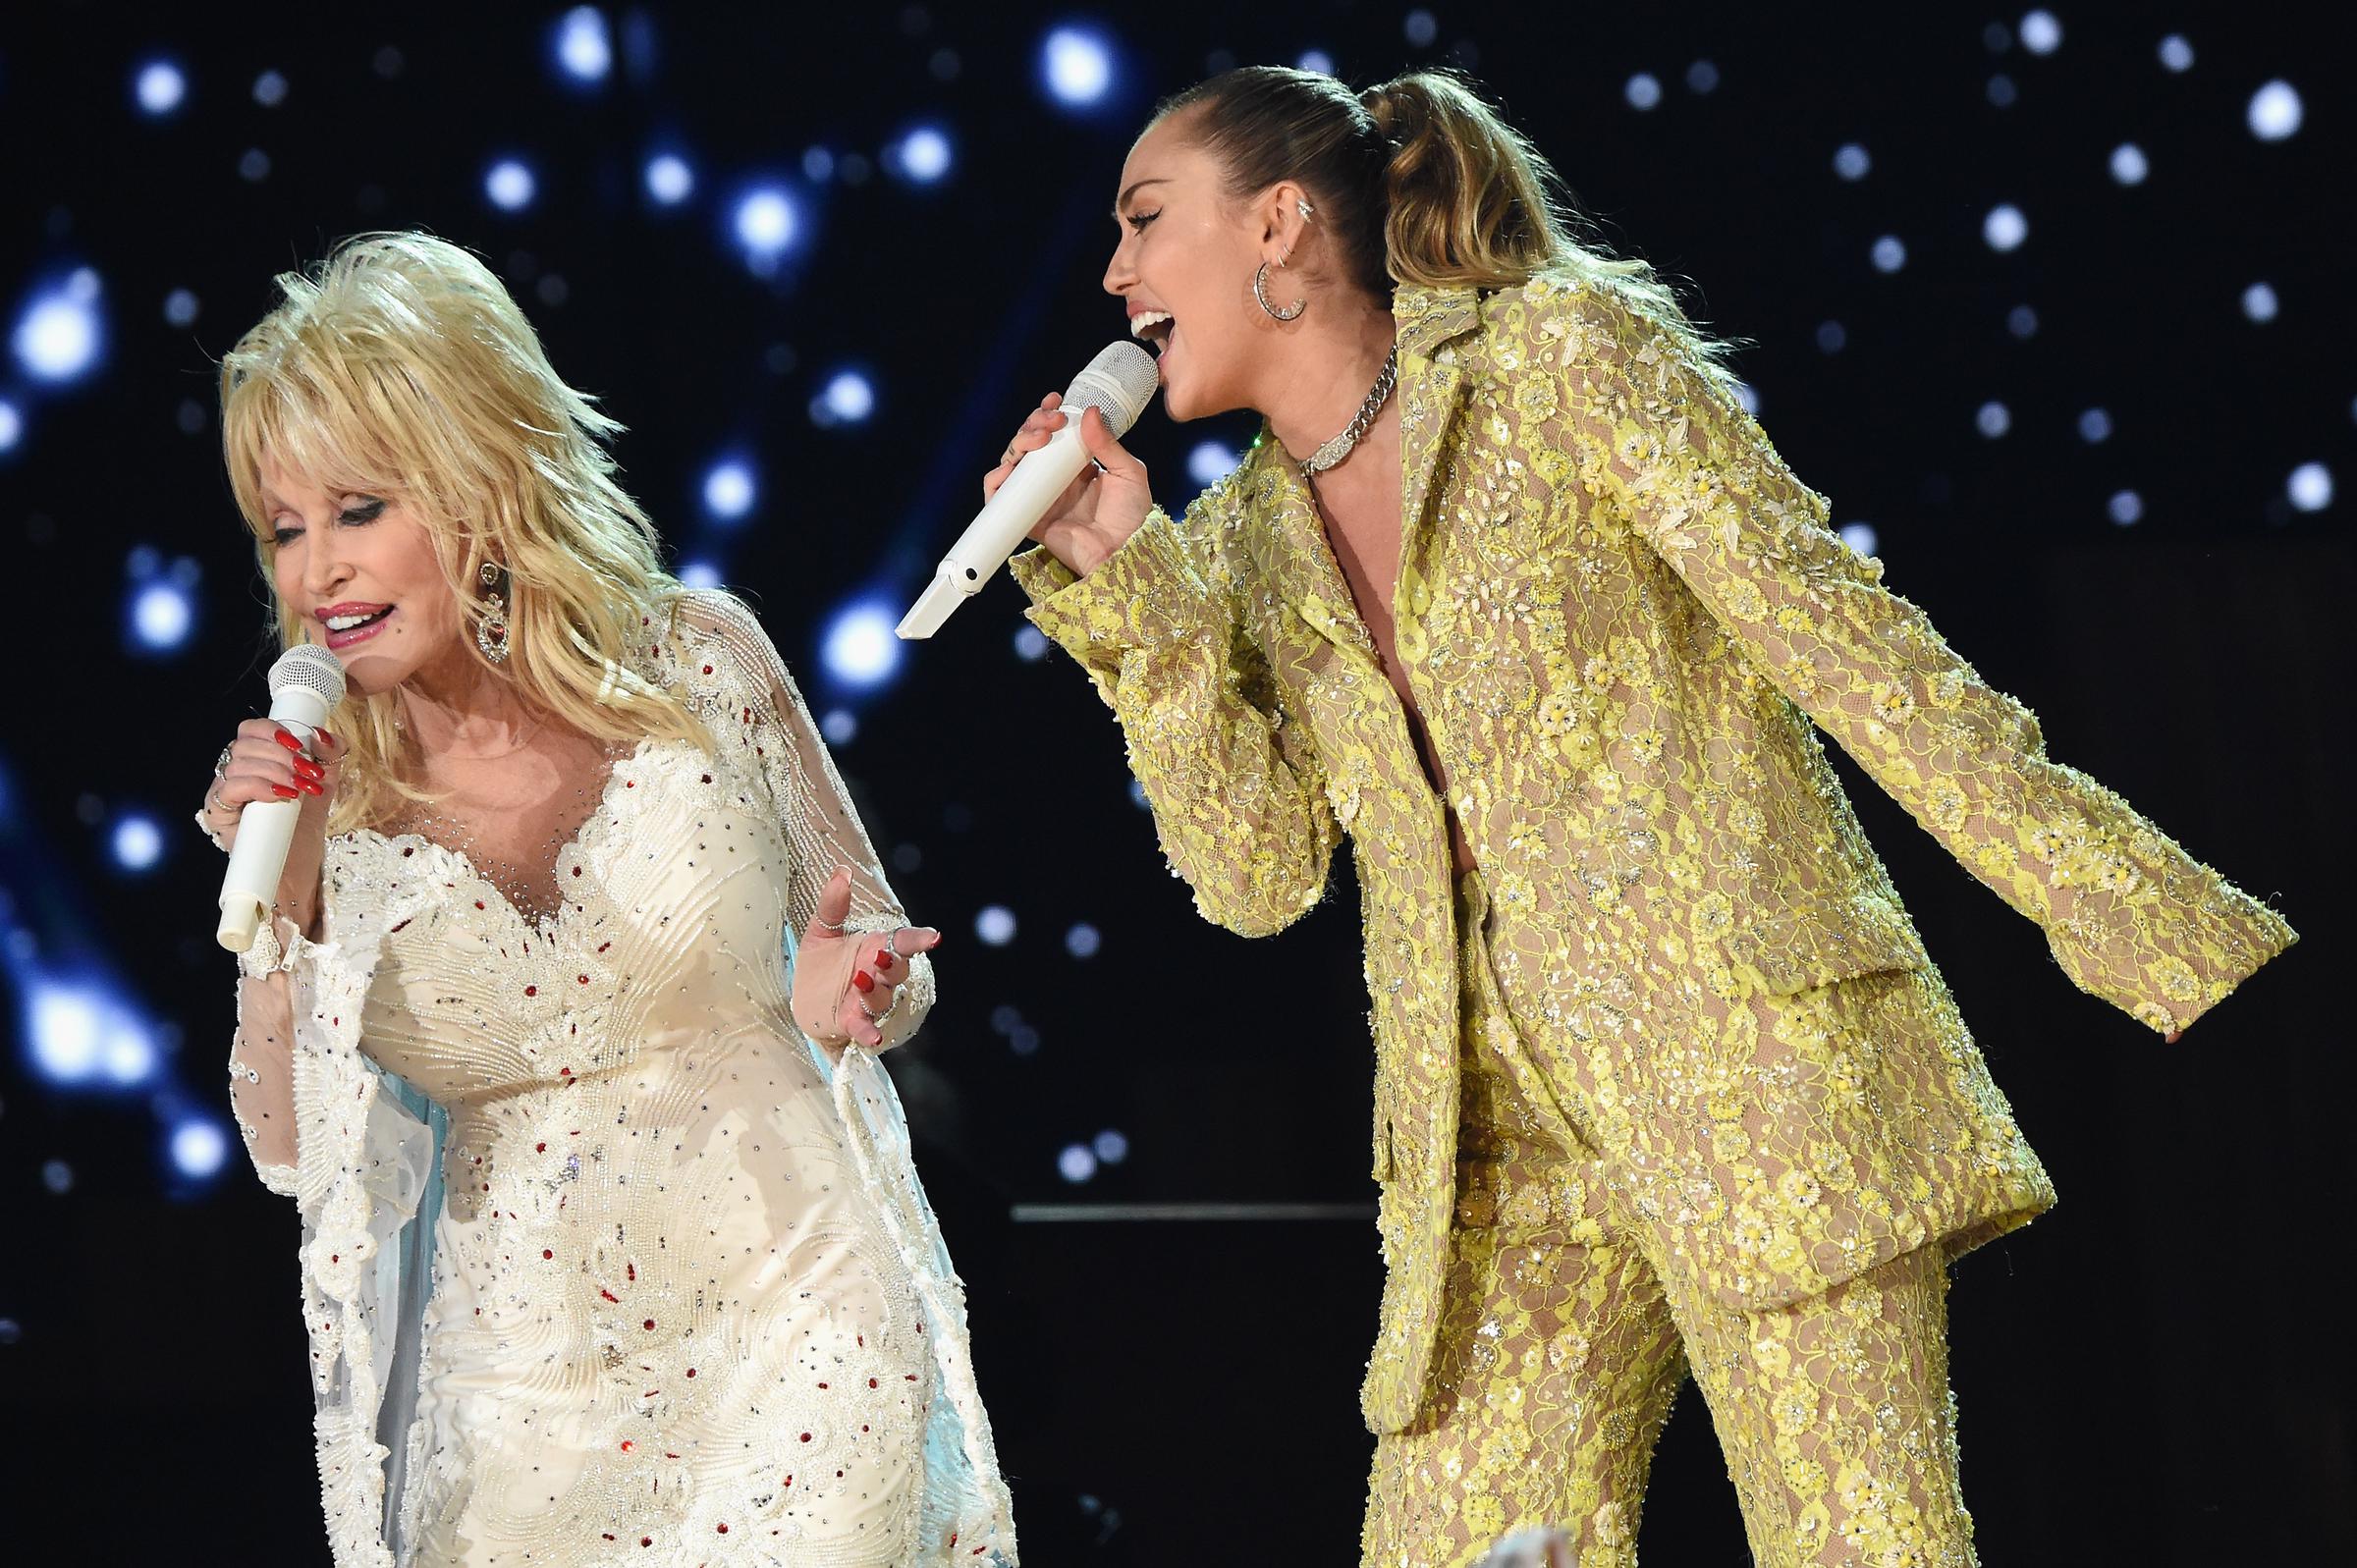 Dolly Parton and Miley Cyrus perform onstage during the 61st Annual GRAMMY Awards in Los Angeles, California, on February 10, 2019. | Source: Getty Images